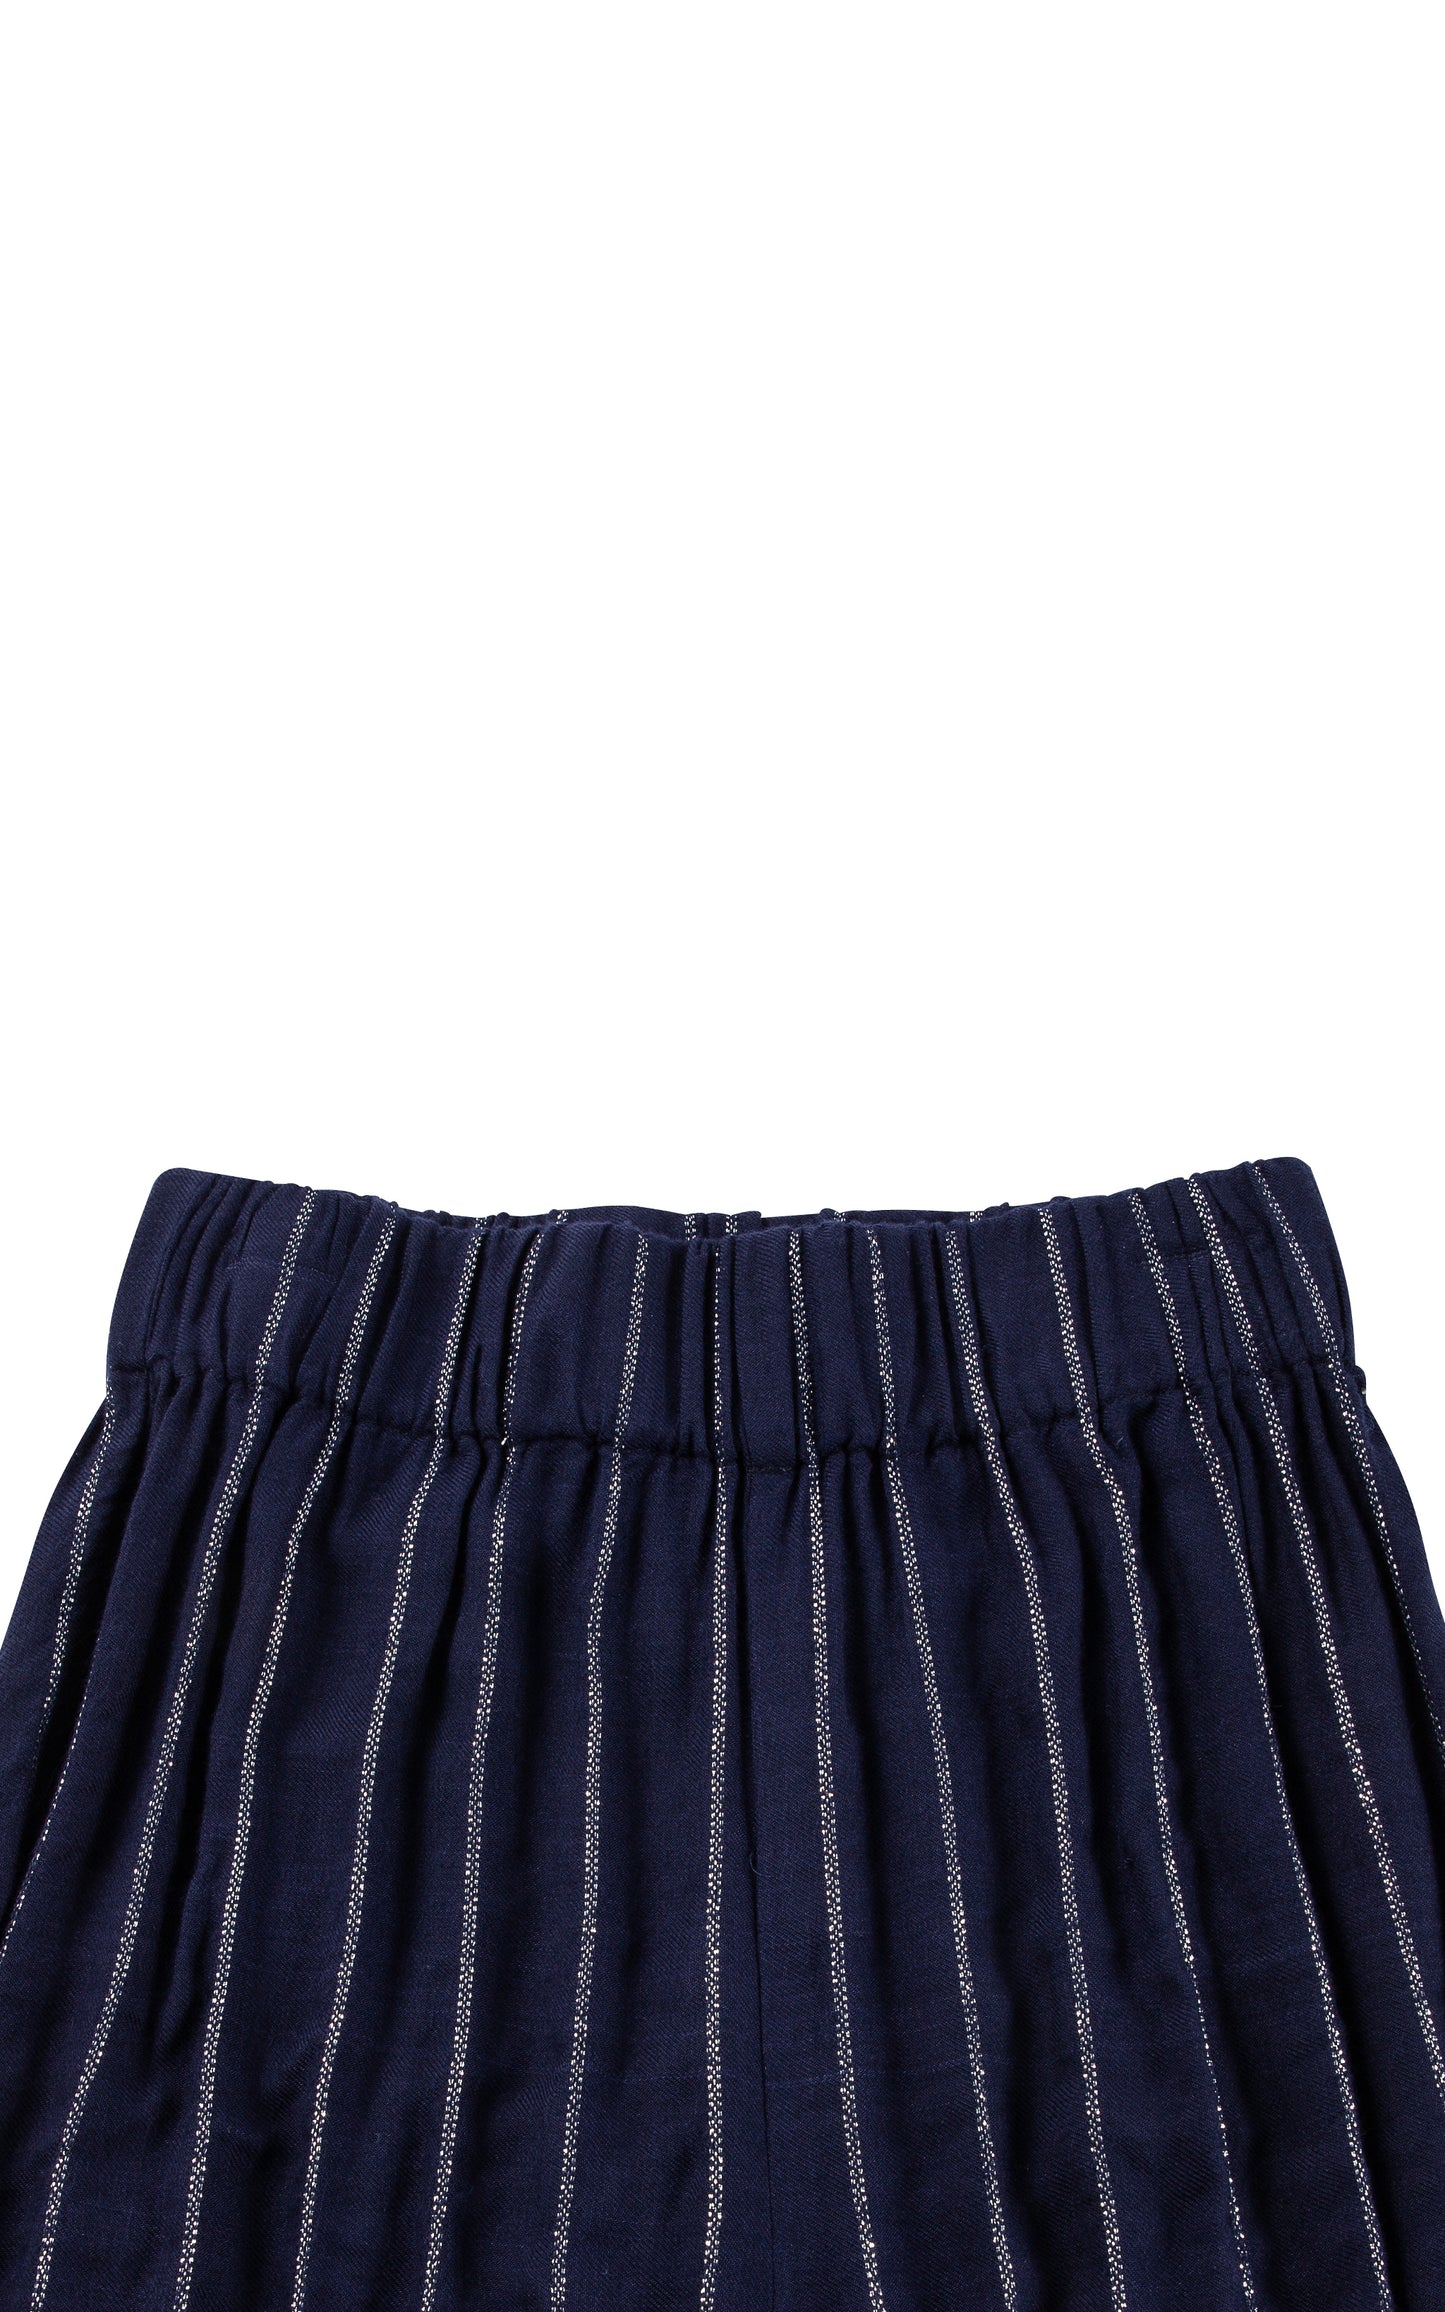 Close up of navy pants with white stripes